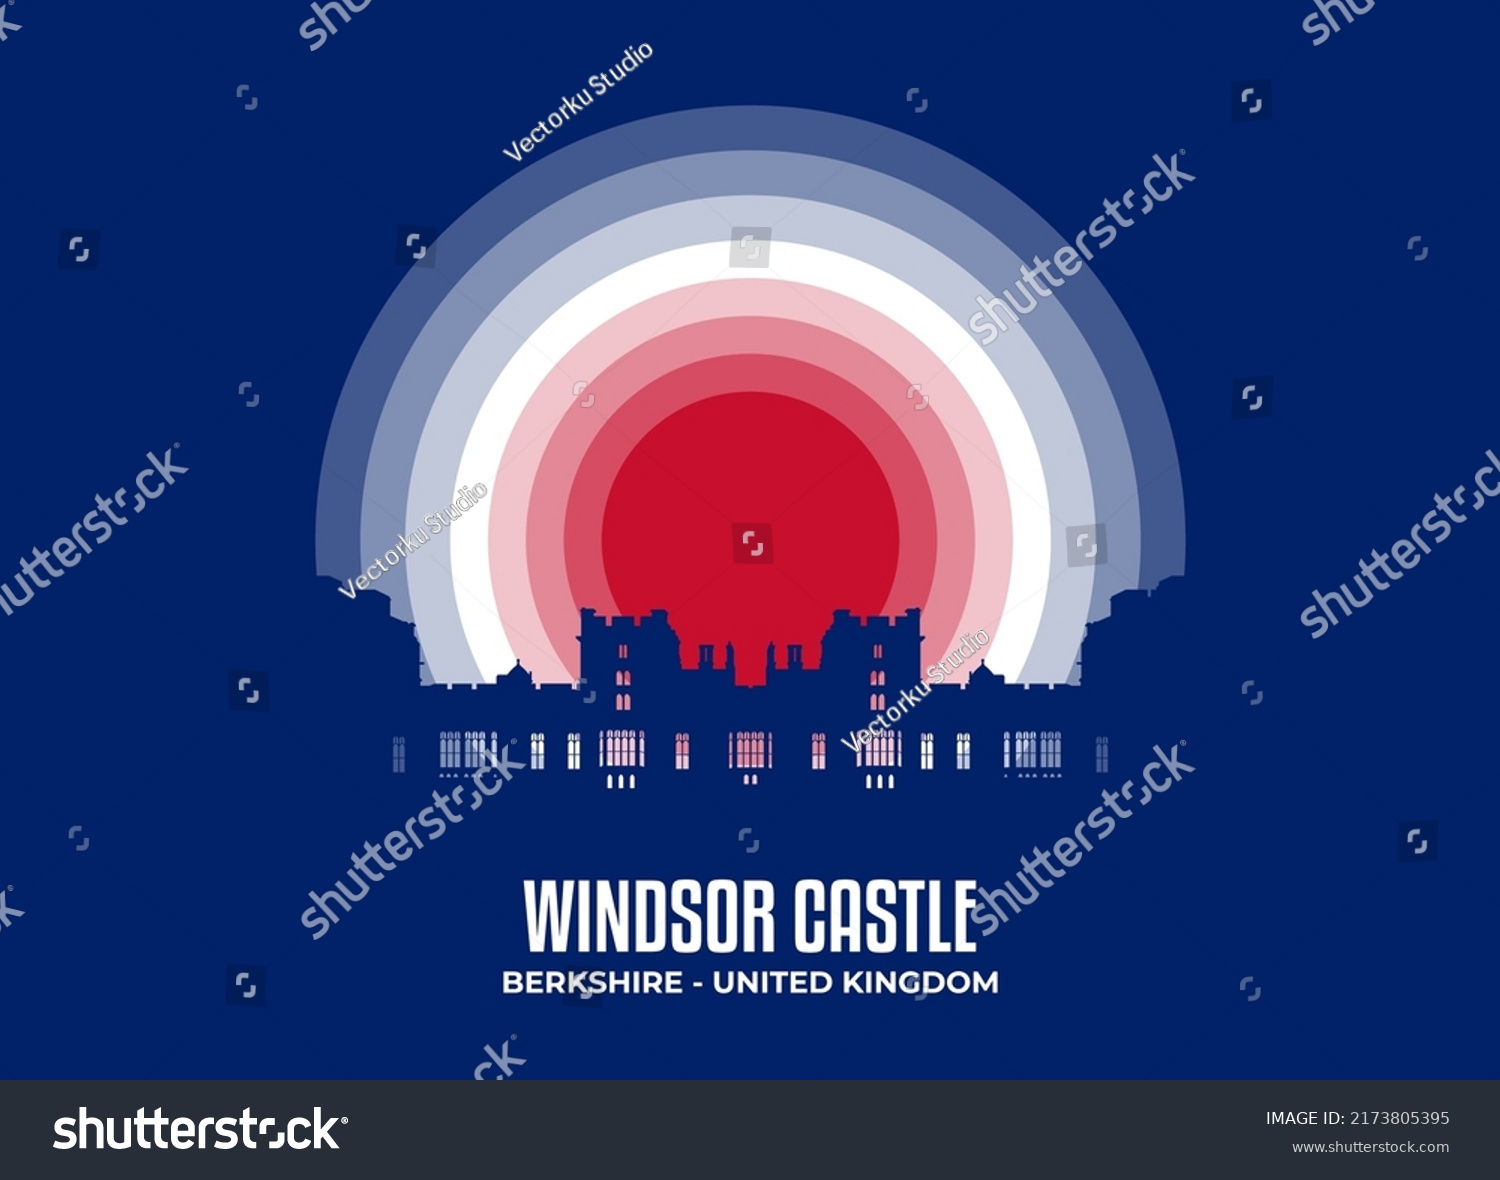 SVG of Windsor Castle illustration. Famous statue and building in moonlight illustration. Color tone based on official country flag. Vector eps 10. svg